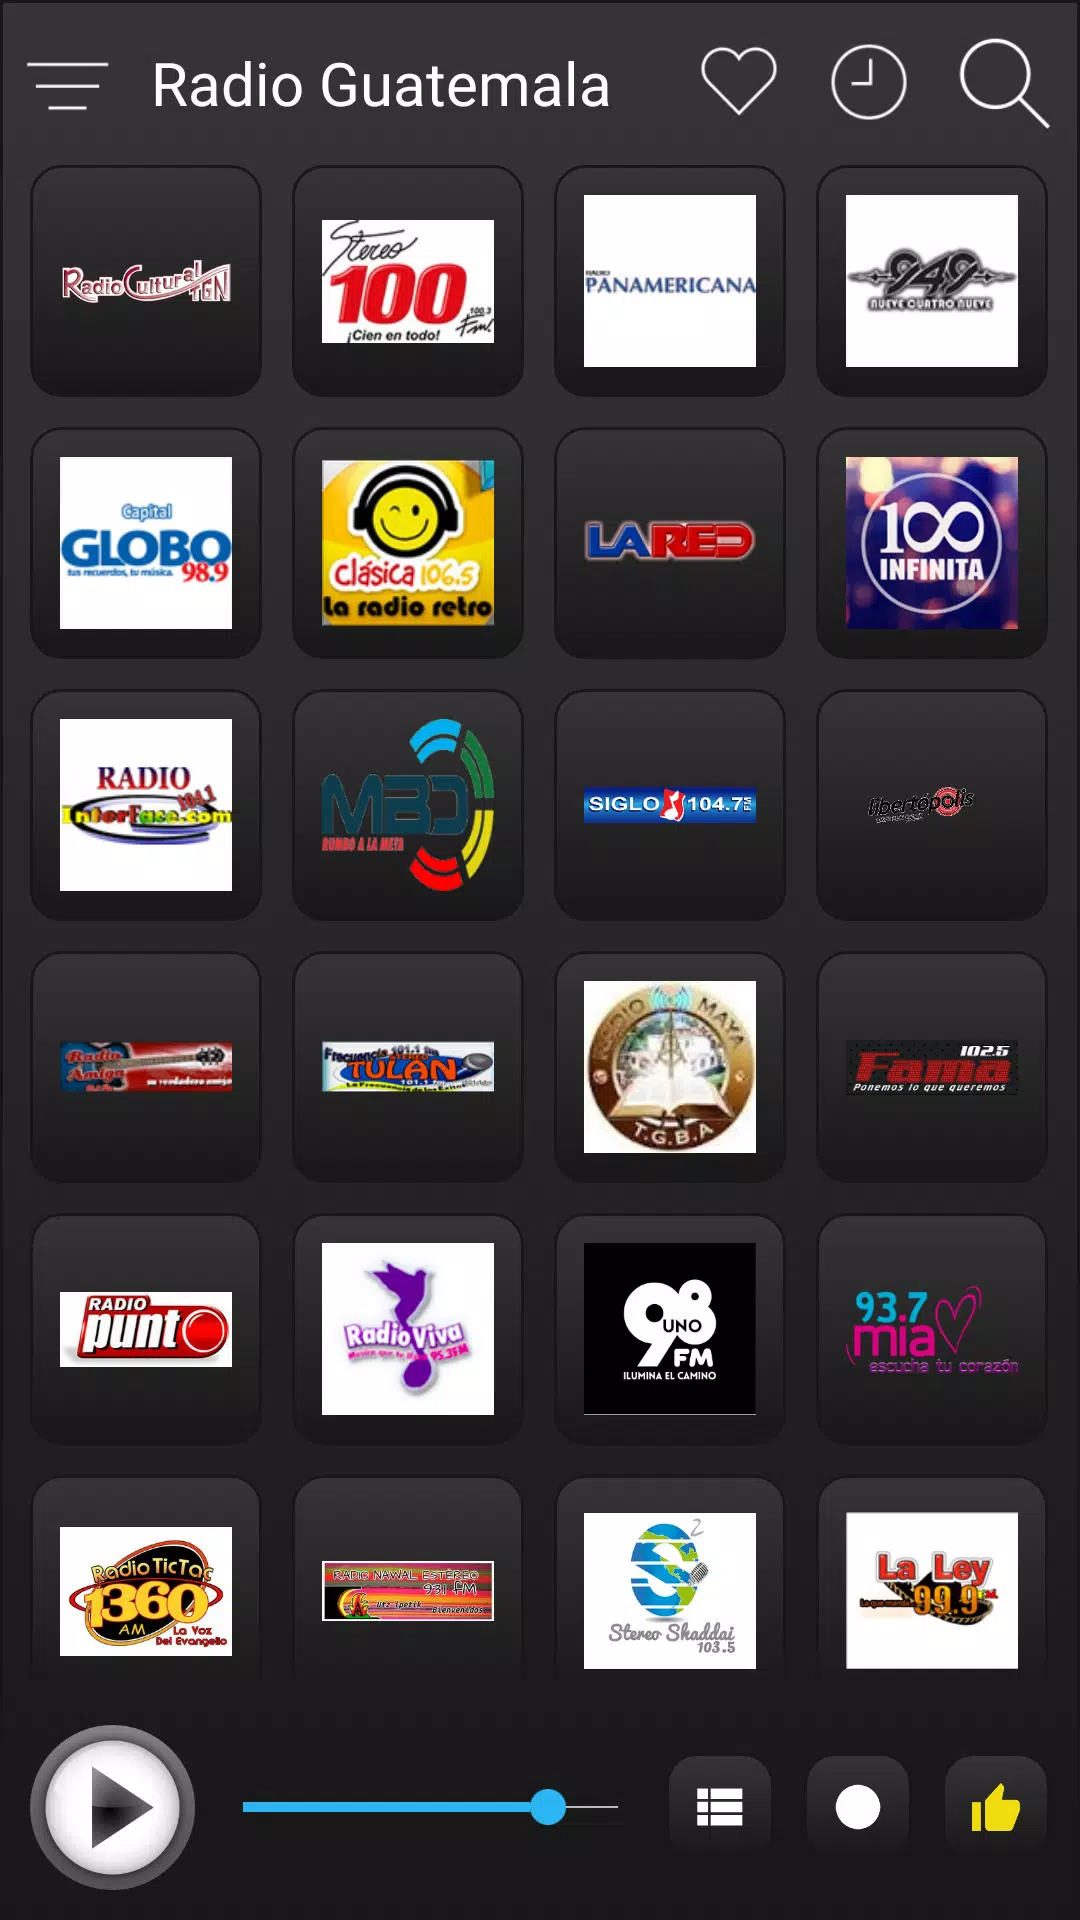 Guatemala Radio Stations Online - Guatemala FM AM for Android - APK Download